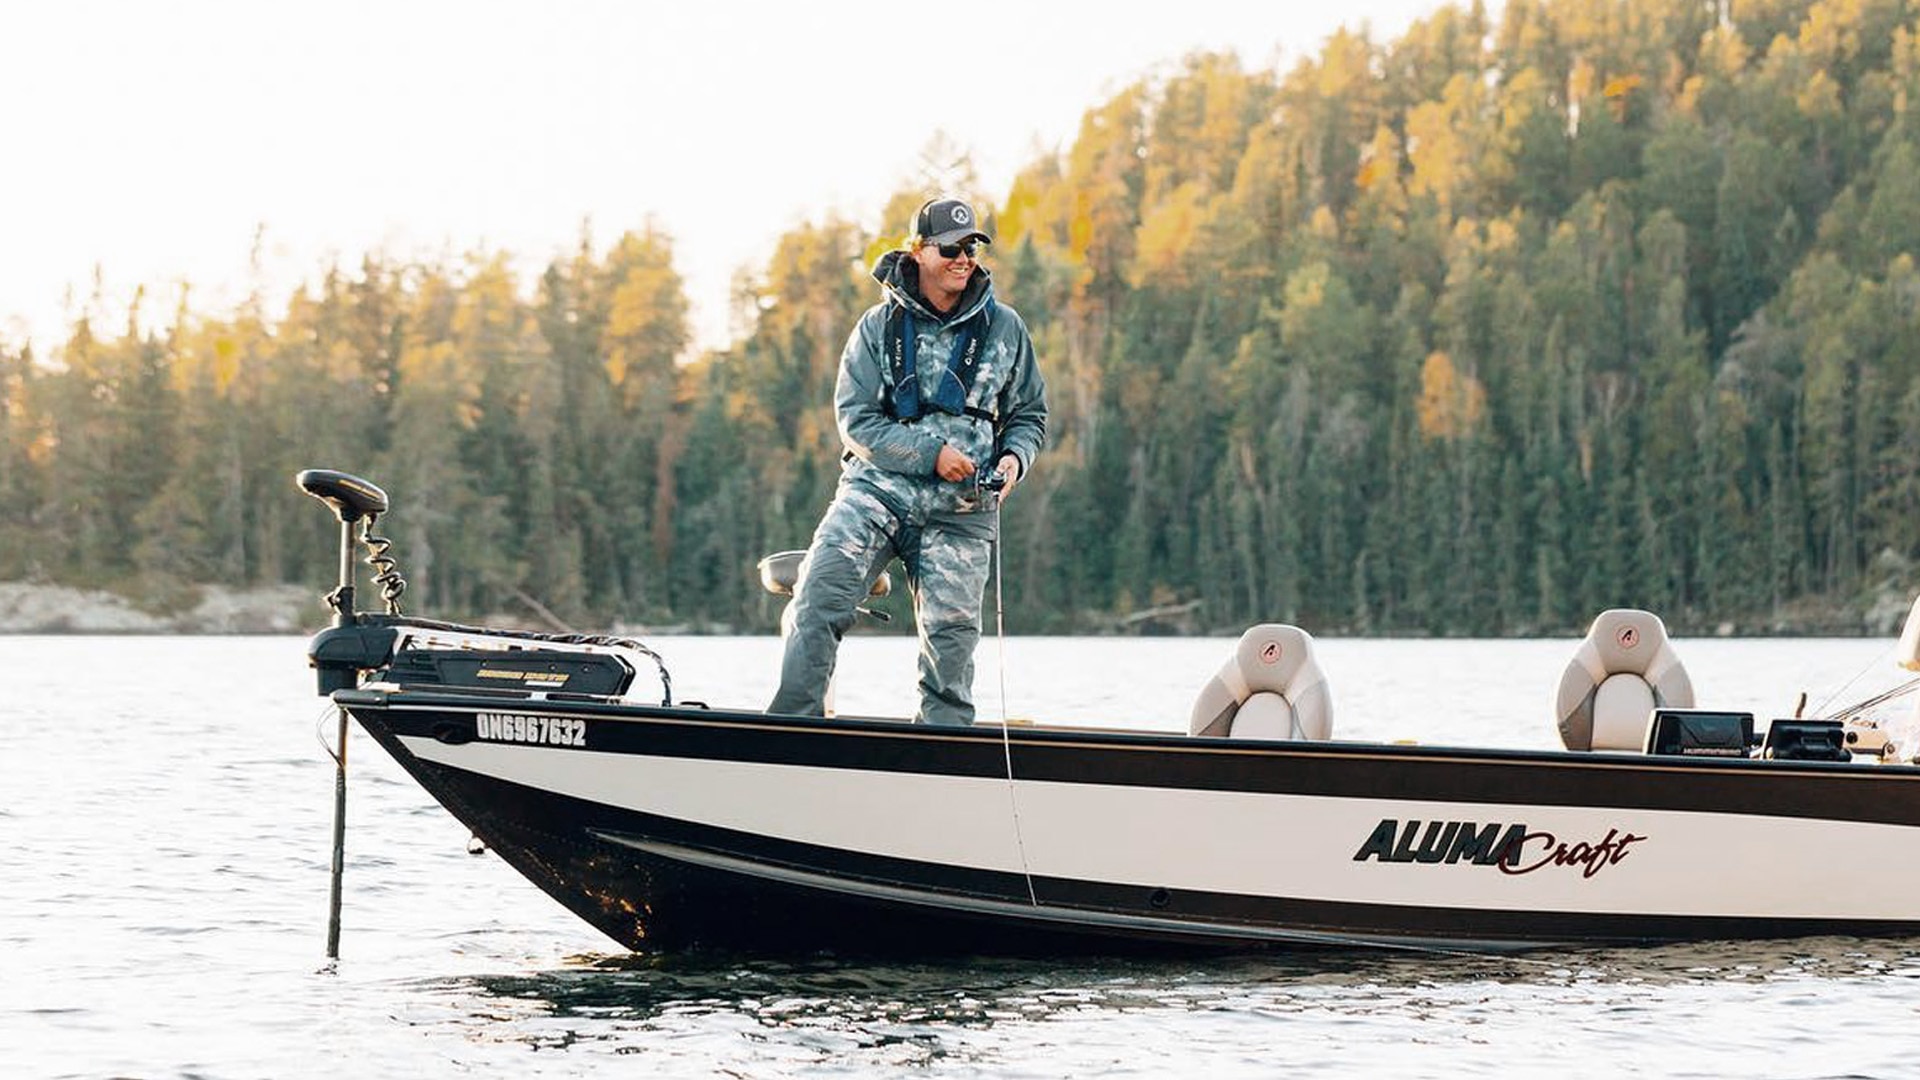 Jay Siemens fishing while standing on his Alumacraft boat